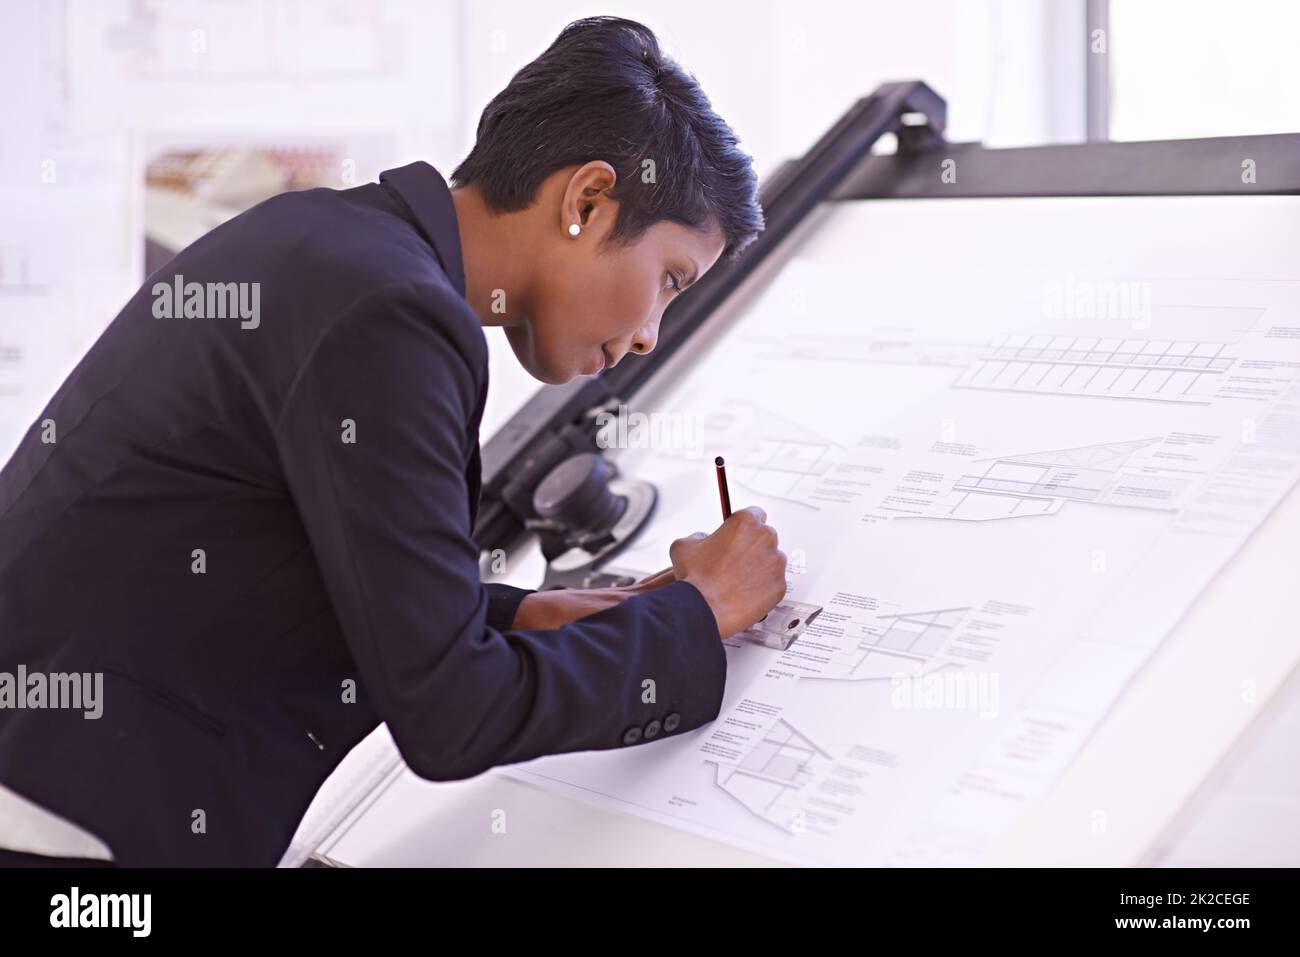 Showing extreme skill at the drawing board. Cropped shot of a female architect working on a building plan at a drawing board. Stock Photo